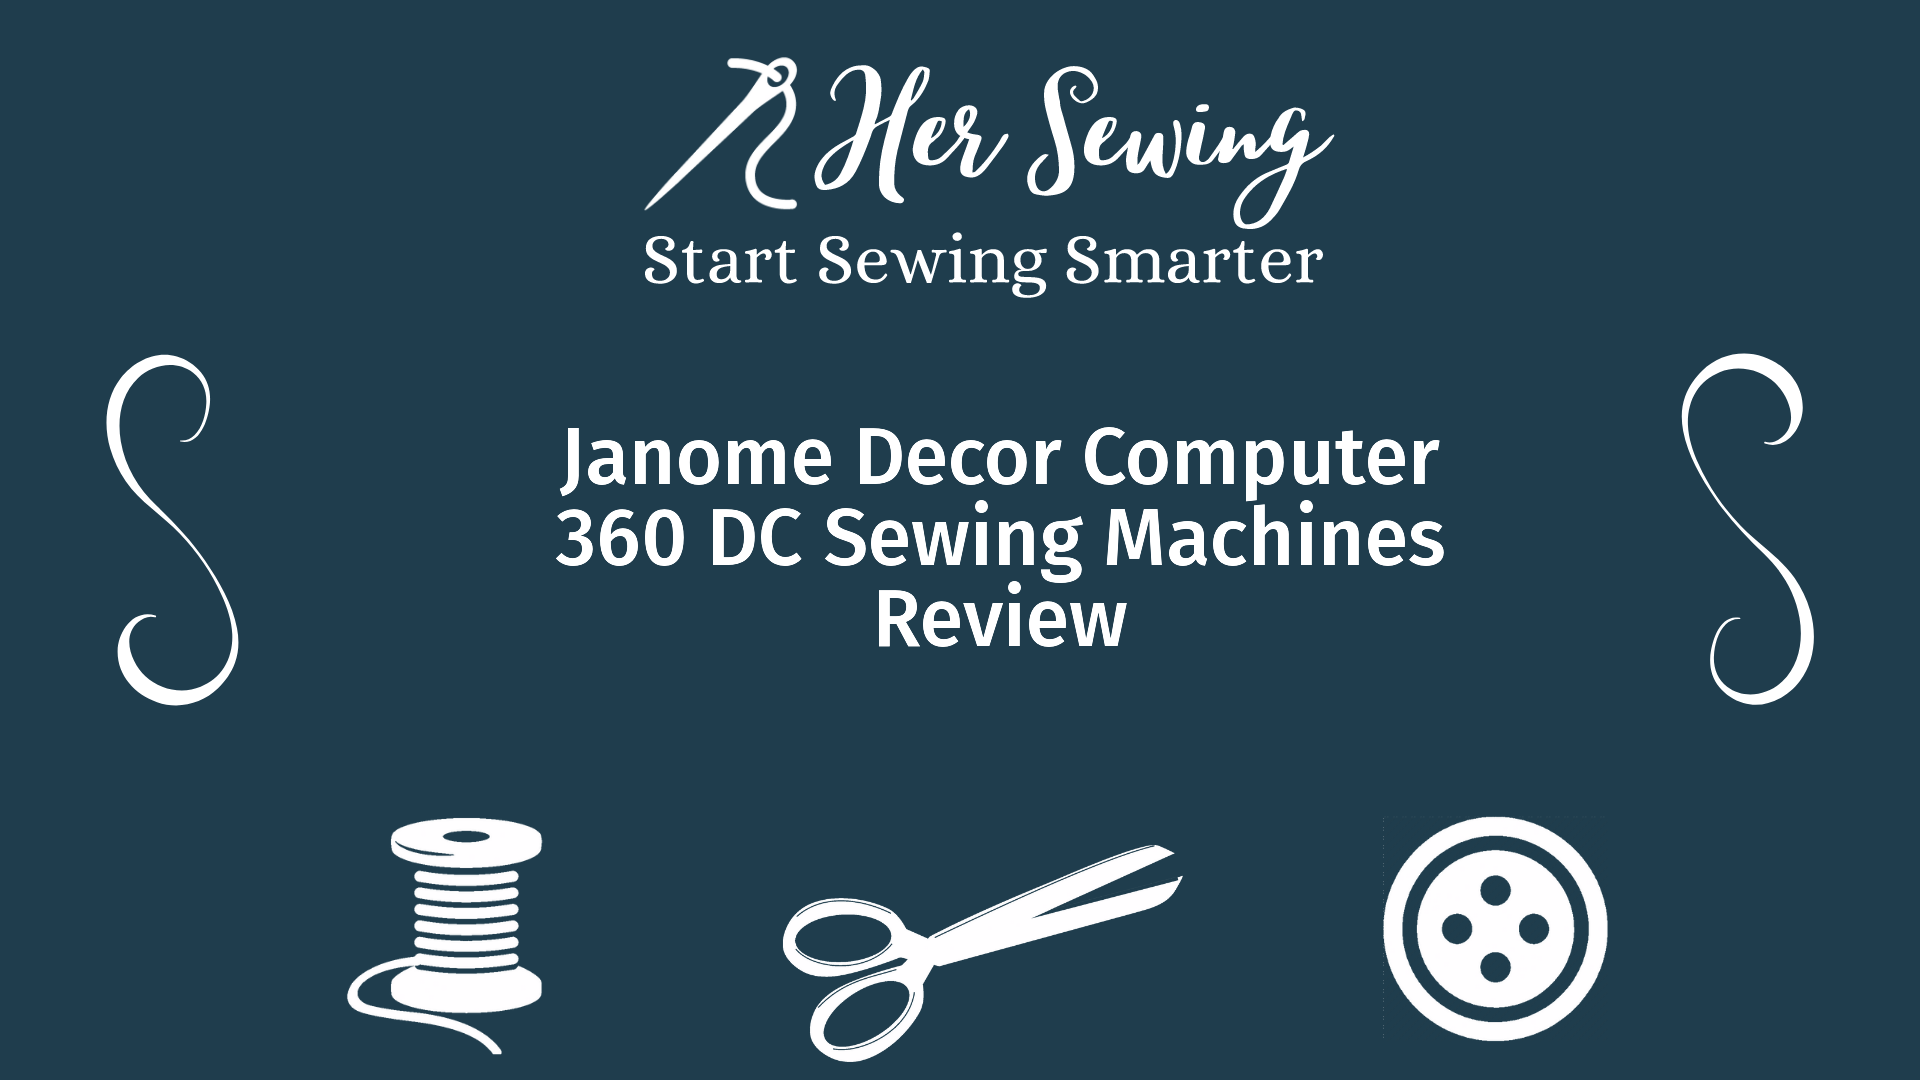 Janome Decor Computer 360 DC Sewing Machines Review